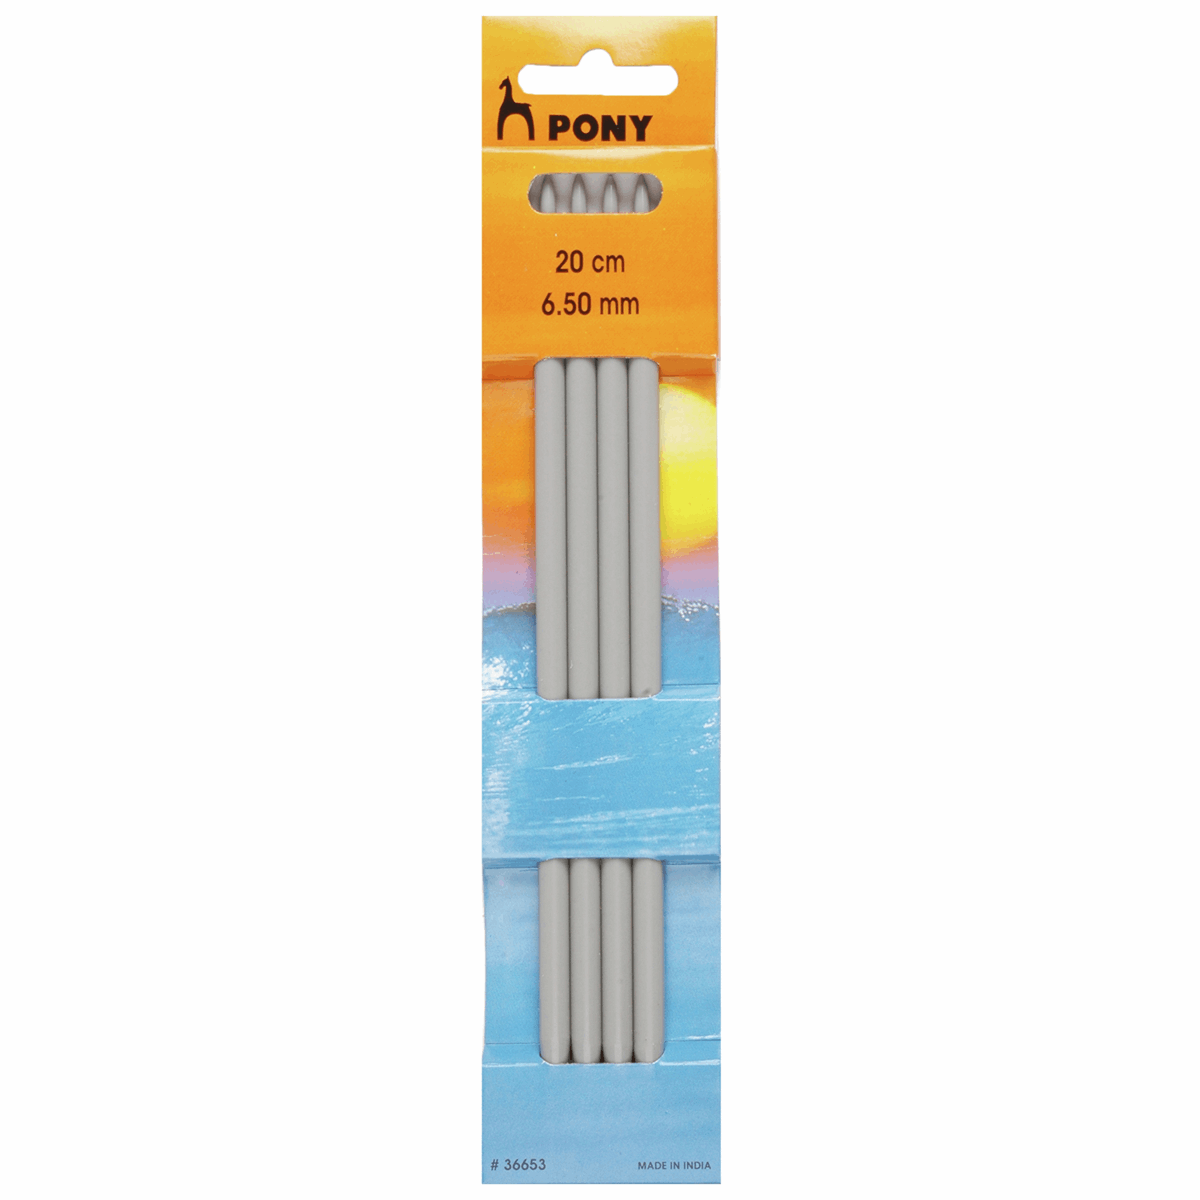 PONY Double-Ended Knitting Pins - 20cm x 6.50mm (Set of 4)